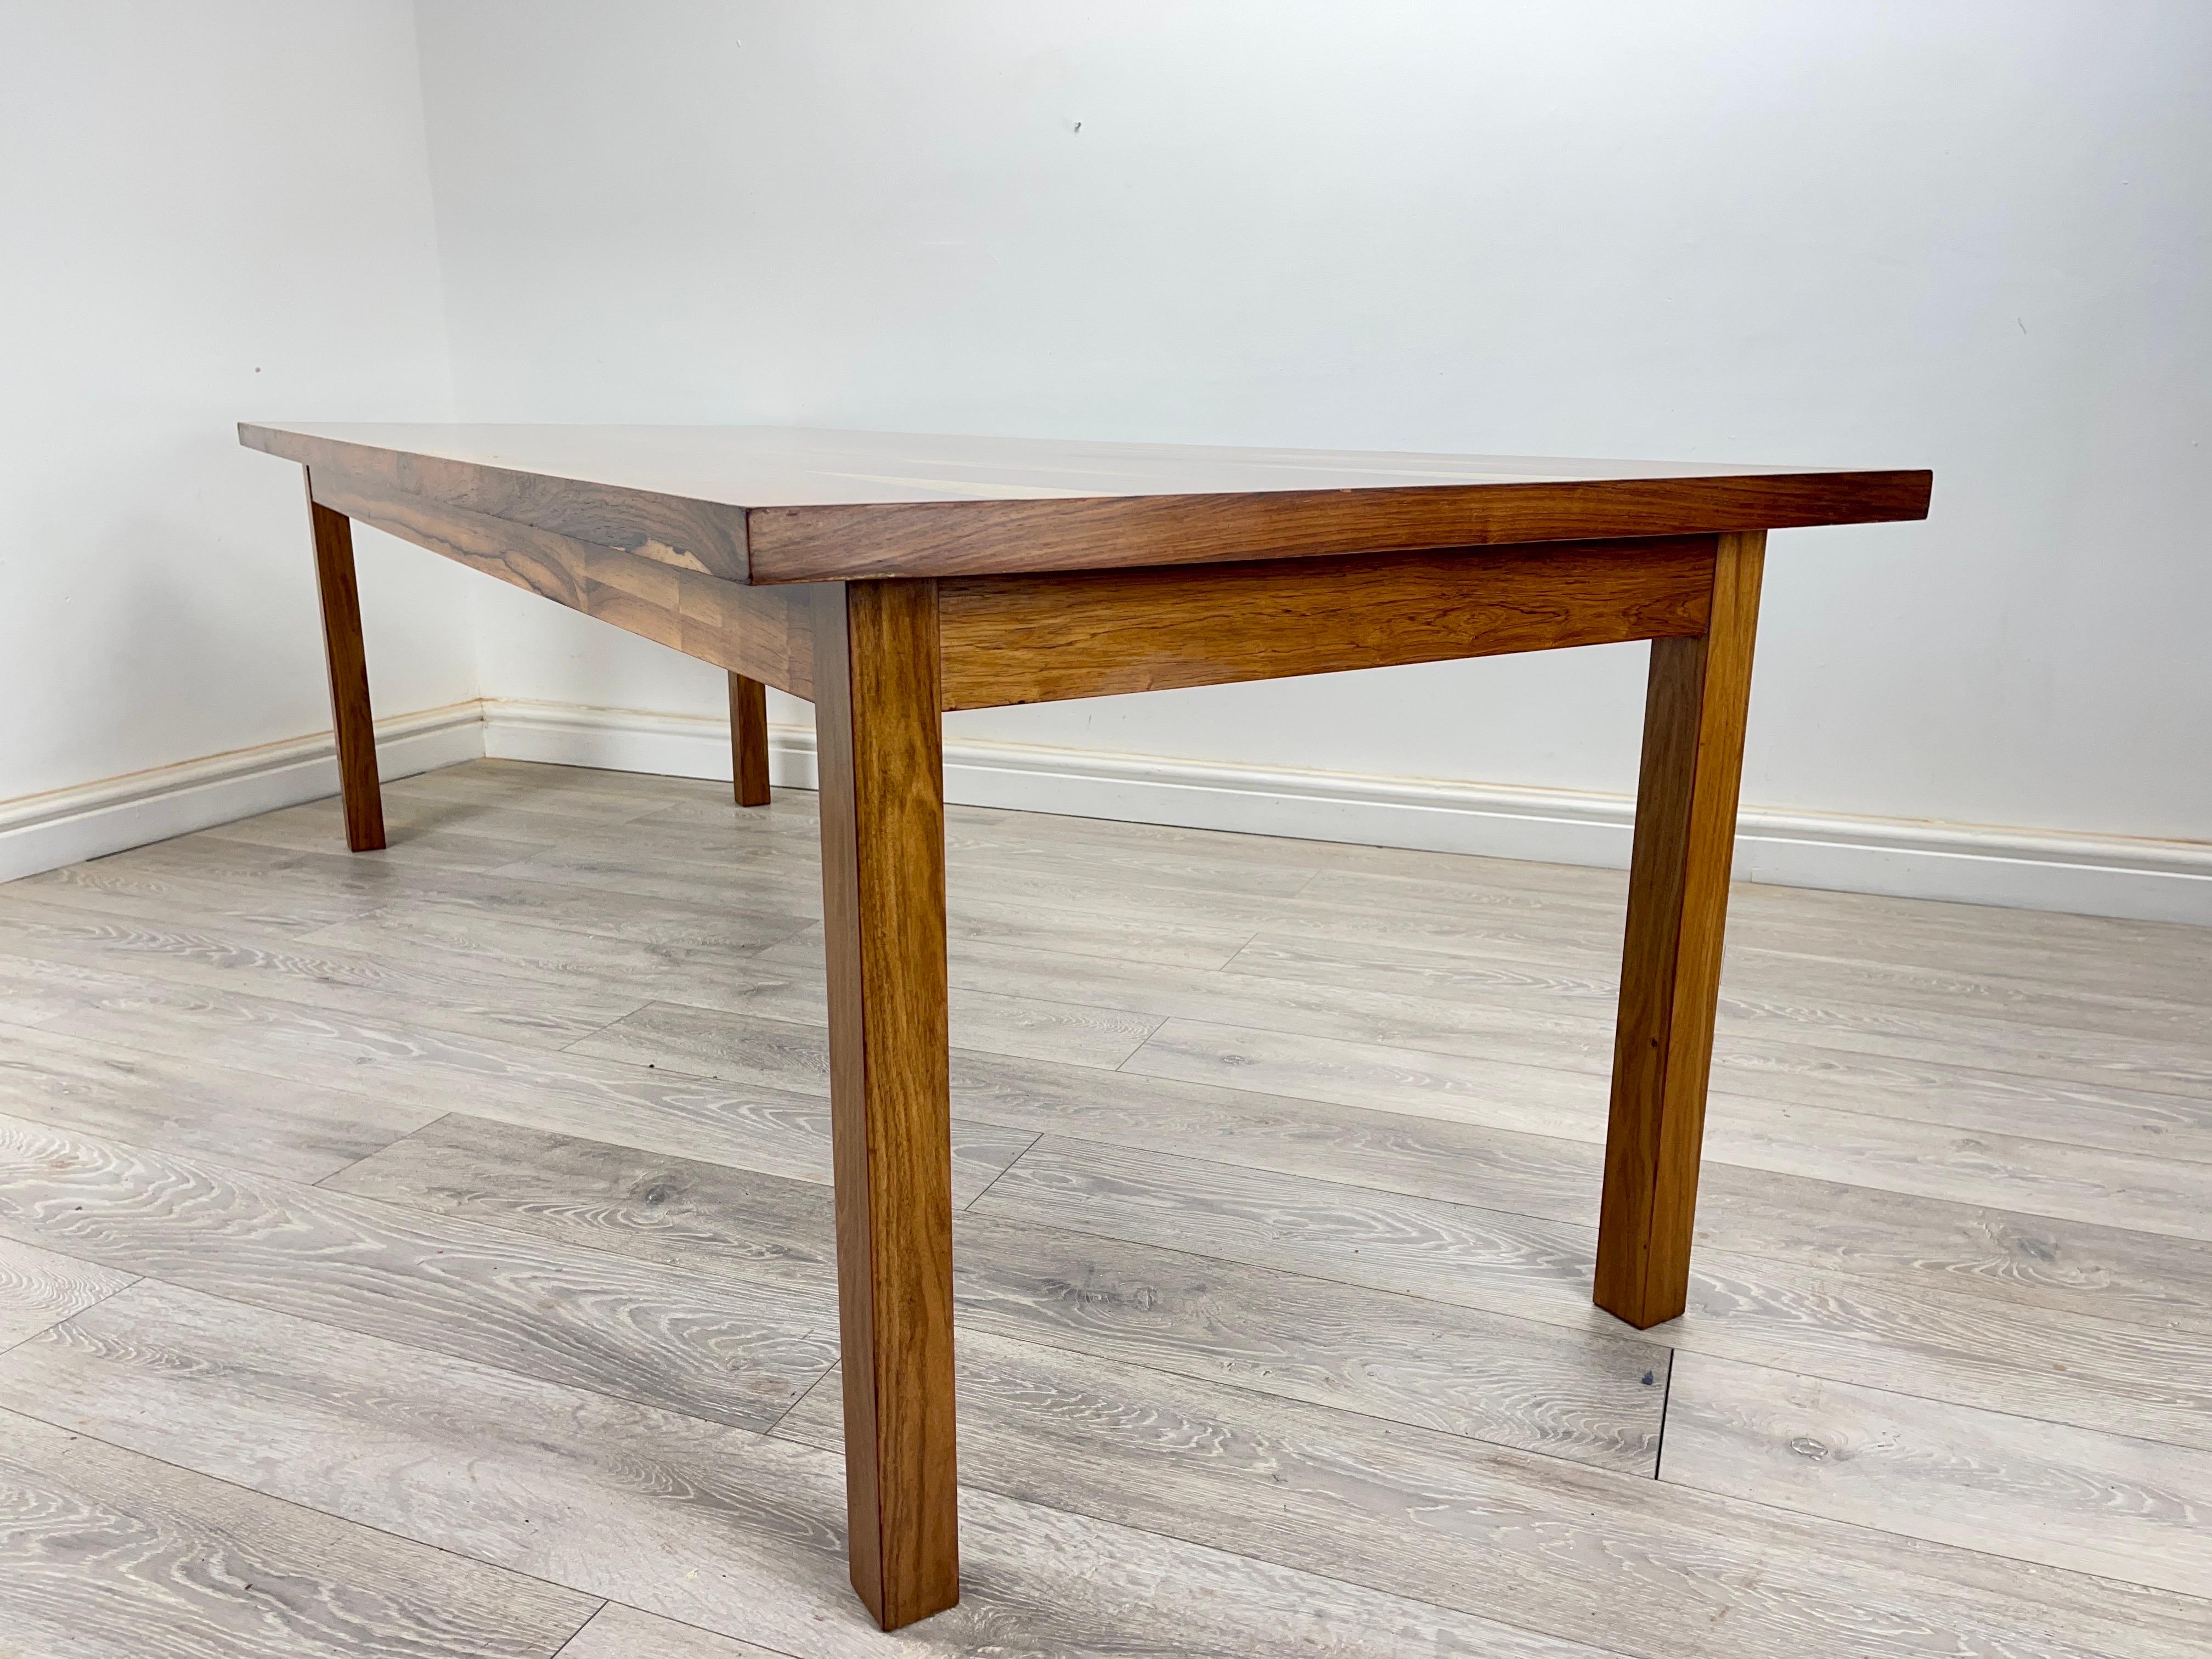 Rosewood Dining
Mid-century Brazilian Rosewood long dining table circa 1960s . The table has stunning rosewood grain throughout, table stands on square rosewood legs . The table top can be easily removed from the frame for easy transportation. The